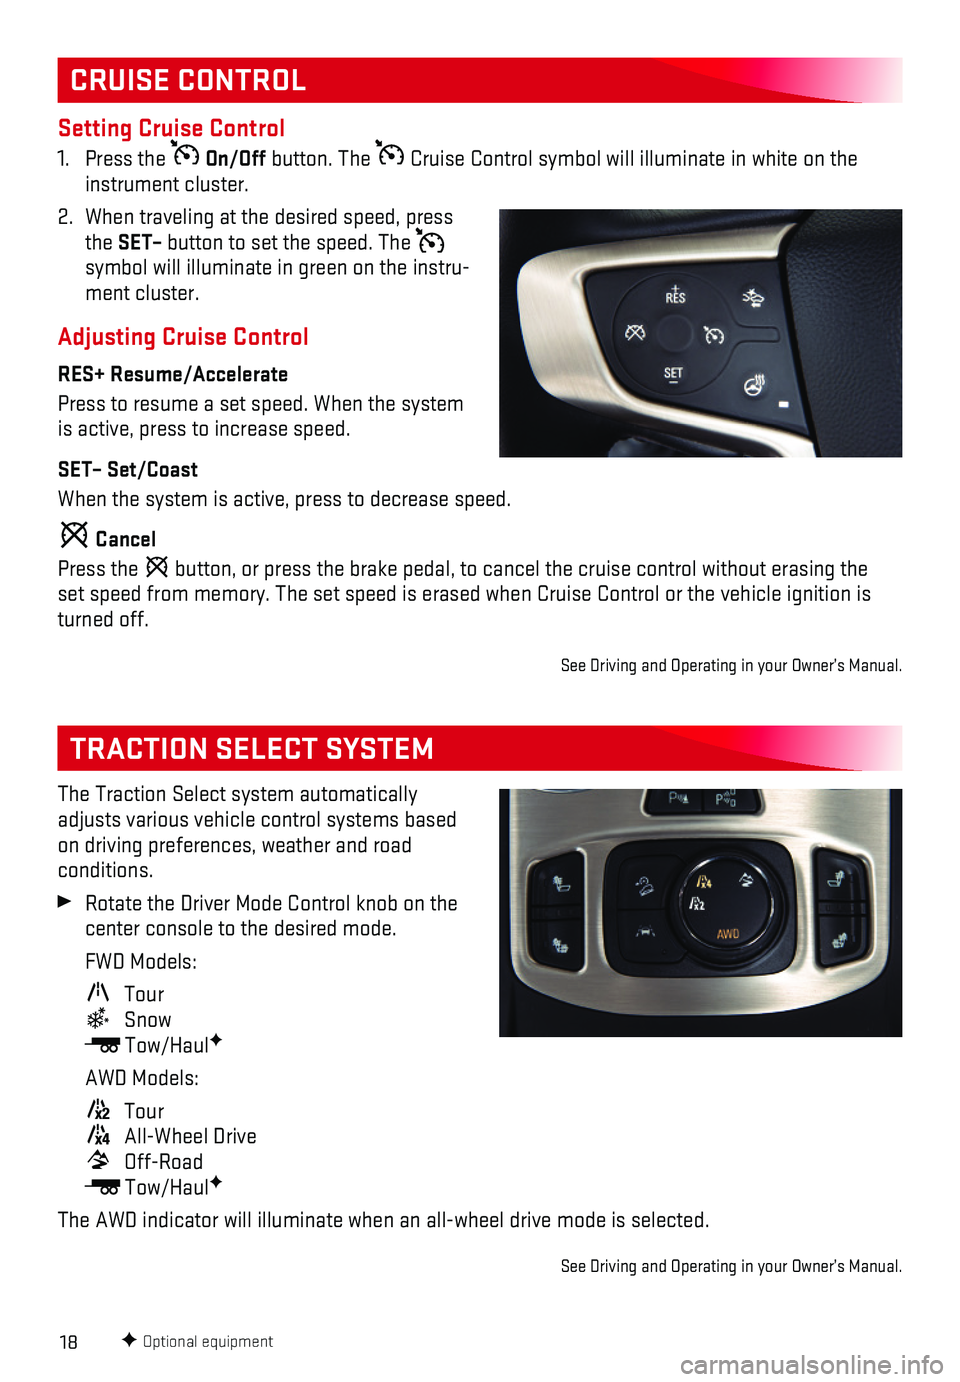 GMC TERRAIN 2018  Get To Know Guide 18
The Traction Select system automatically adjusts various vehicle control systems based on driving preferences, weather and road  conditions.
 Rotate the Driver Mode Control knob on the center conso